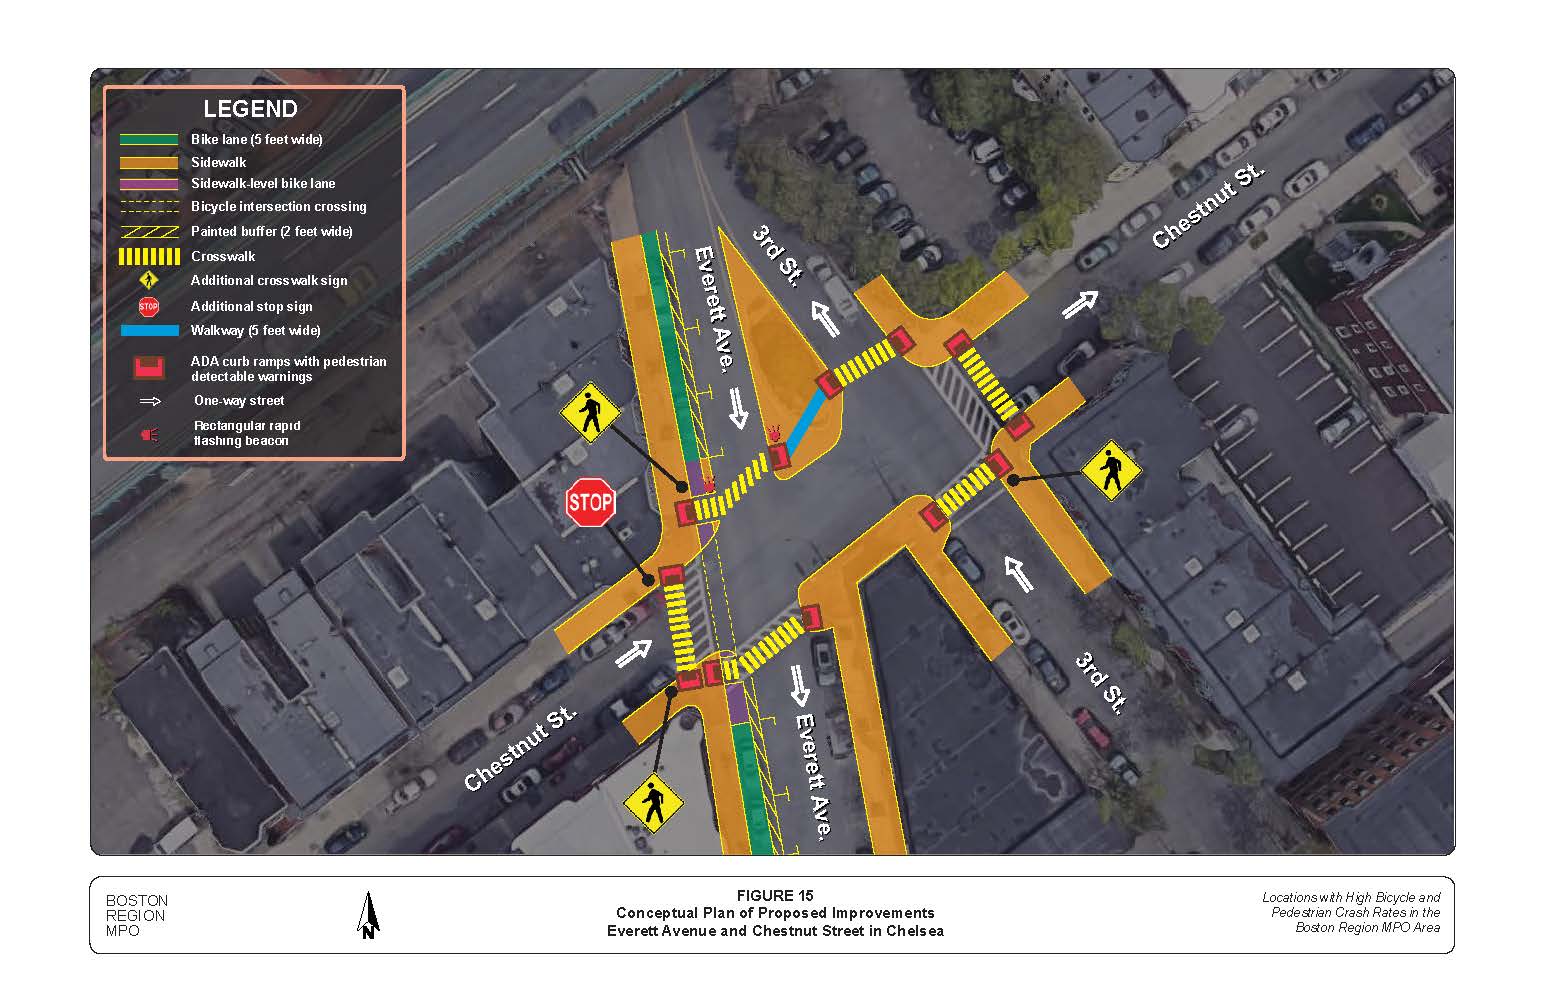 Figure 15
Conceptual Plan of Proposed Improvements
Everett Avenue and Chestnut Street in Chelsea